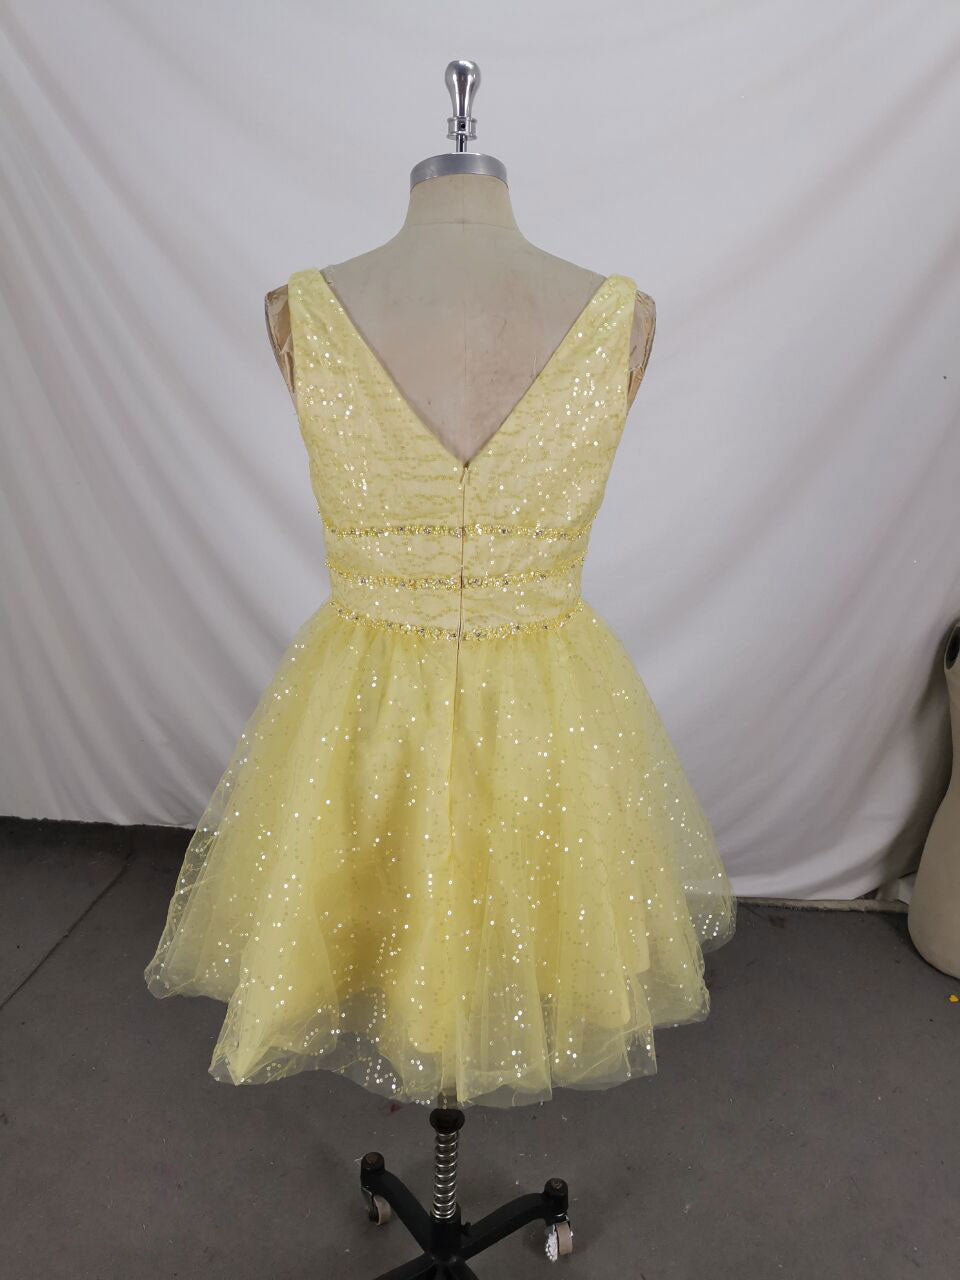 Dress Short, Yellow V Neck Tulle Sequin Short Prom Dress, Yellow Tulle Homecoming Dress